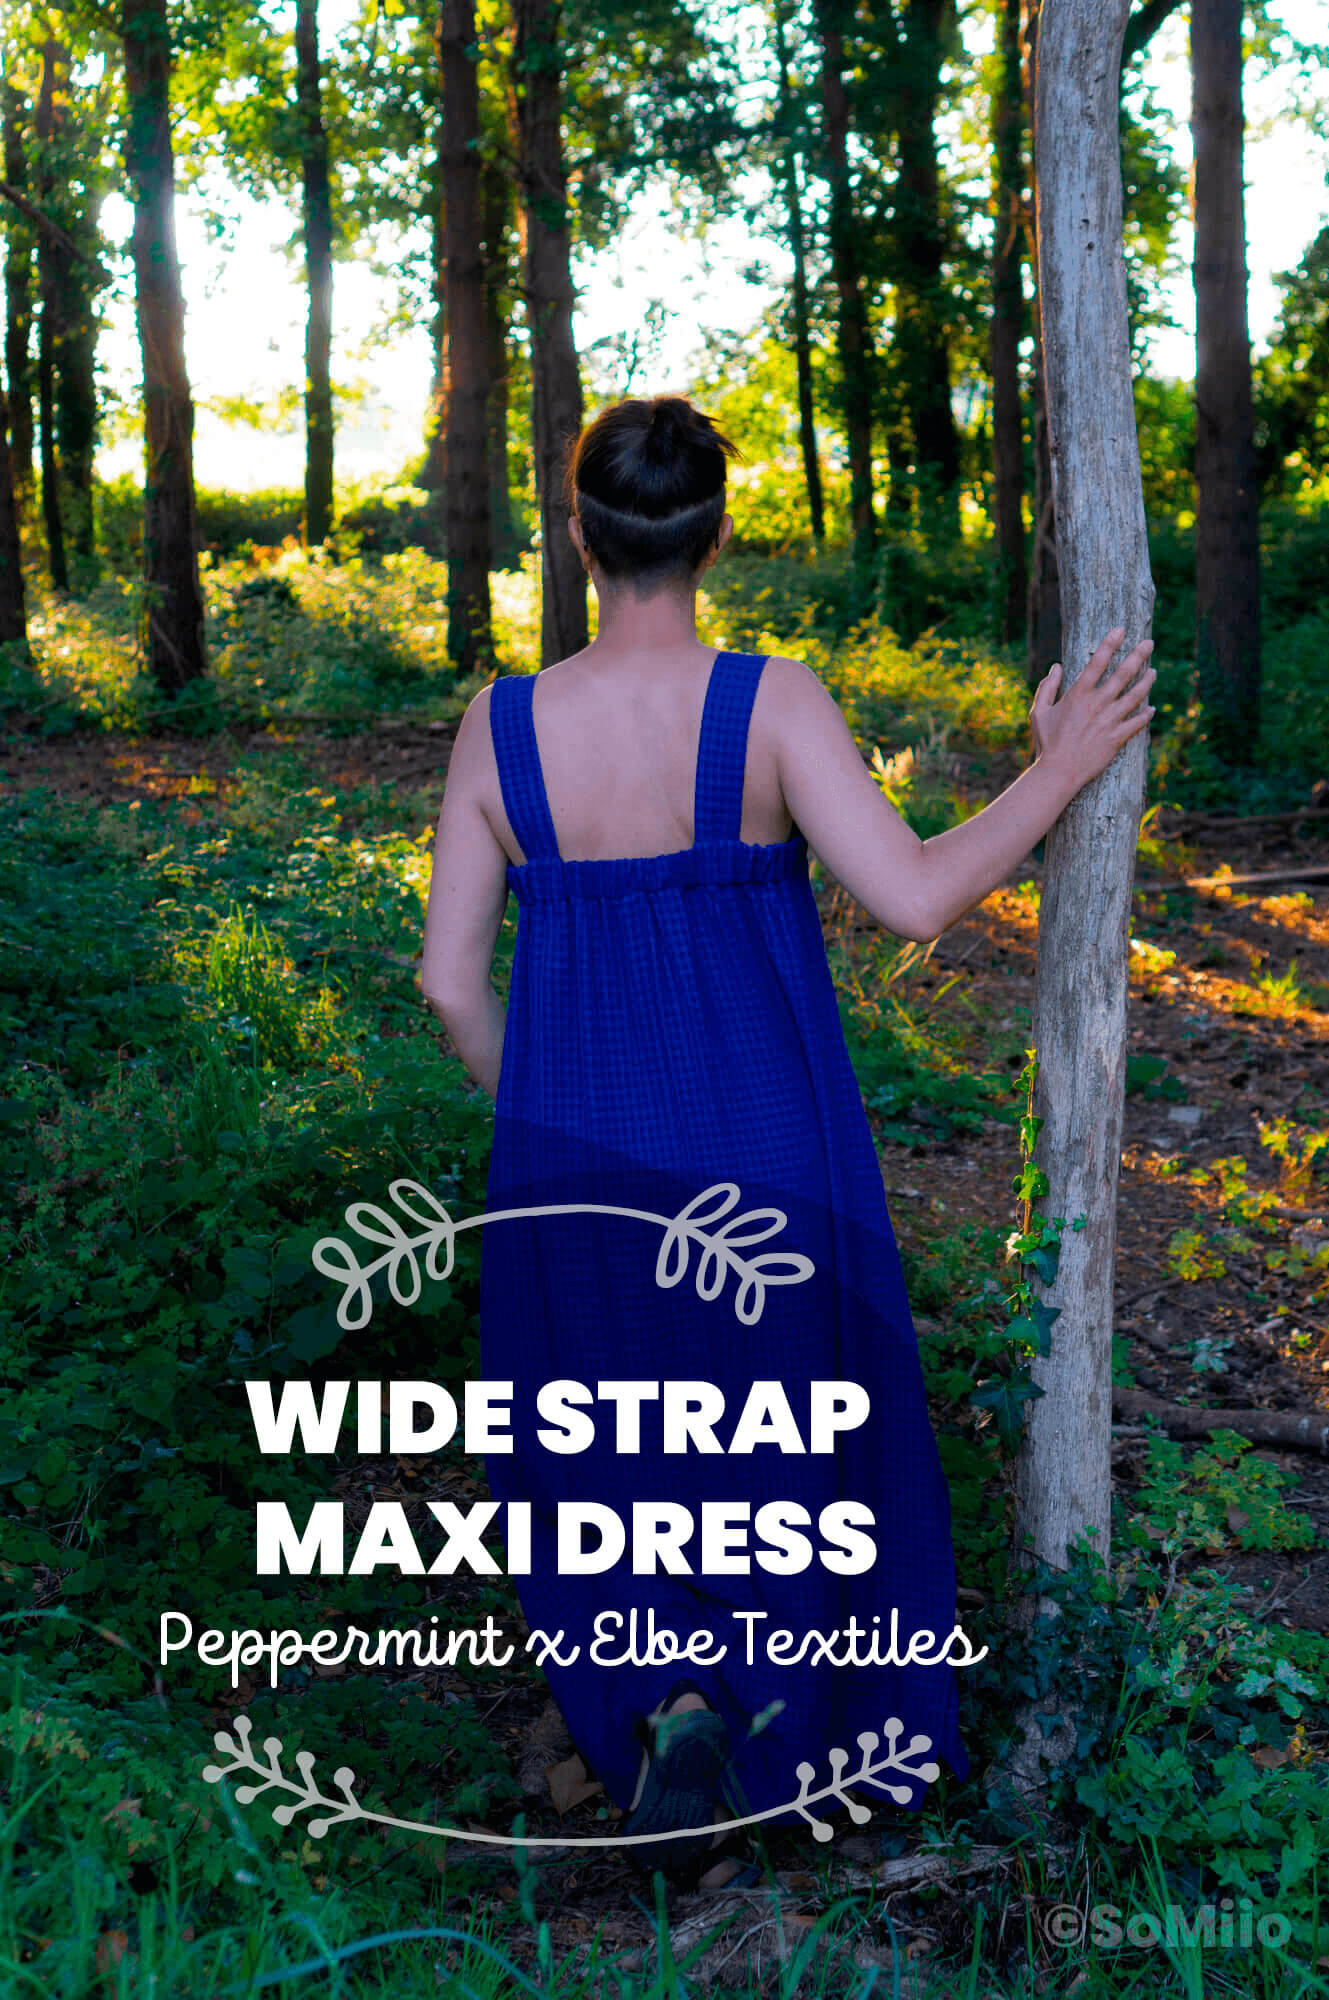 Sewing the Wide Strap Maxi Dress • free pattern (Peppermint) - SoMiio